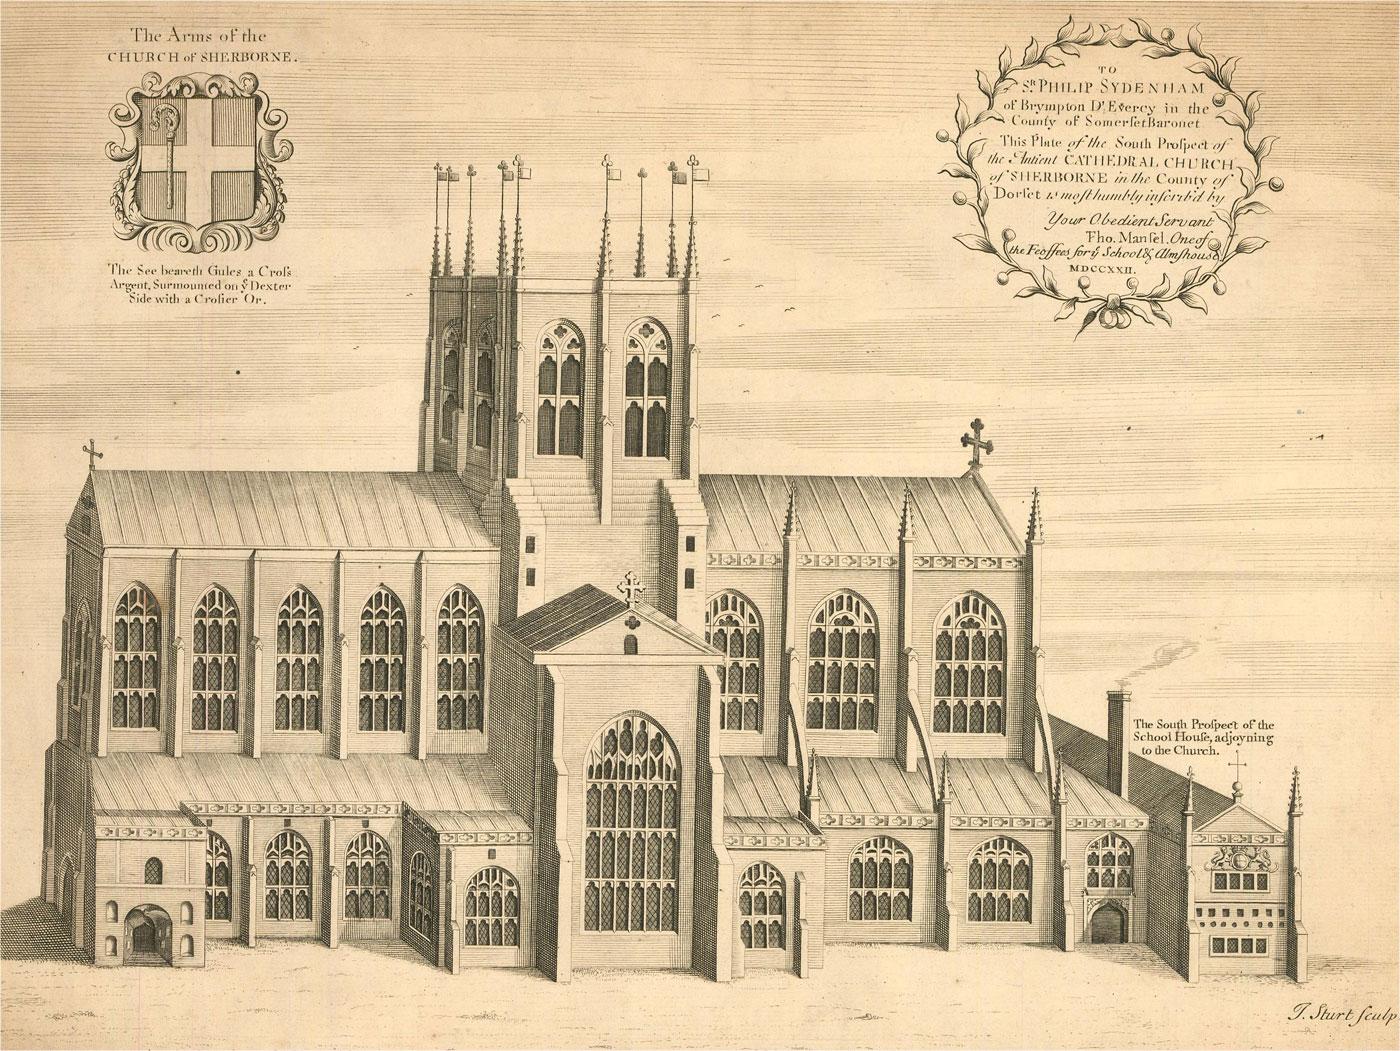 An architectural engraving of Sherborne Abbey in Dorset by John Sturt (1658-1730) after William King of Sherborne. The Abbey has been a Saxon cathedral, a Benedictine abbey church, and since 1539, a parish church. The Arms of the Church of Sherborne